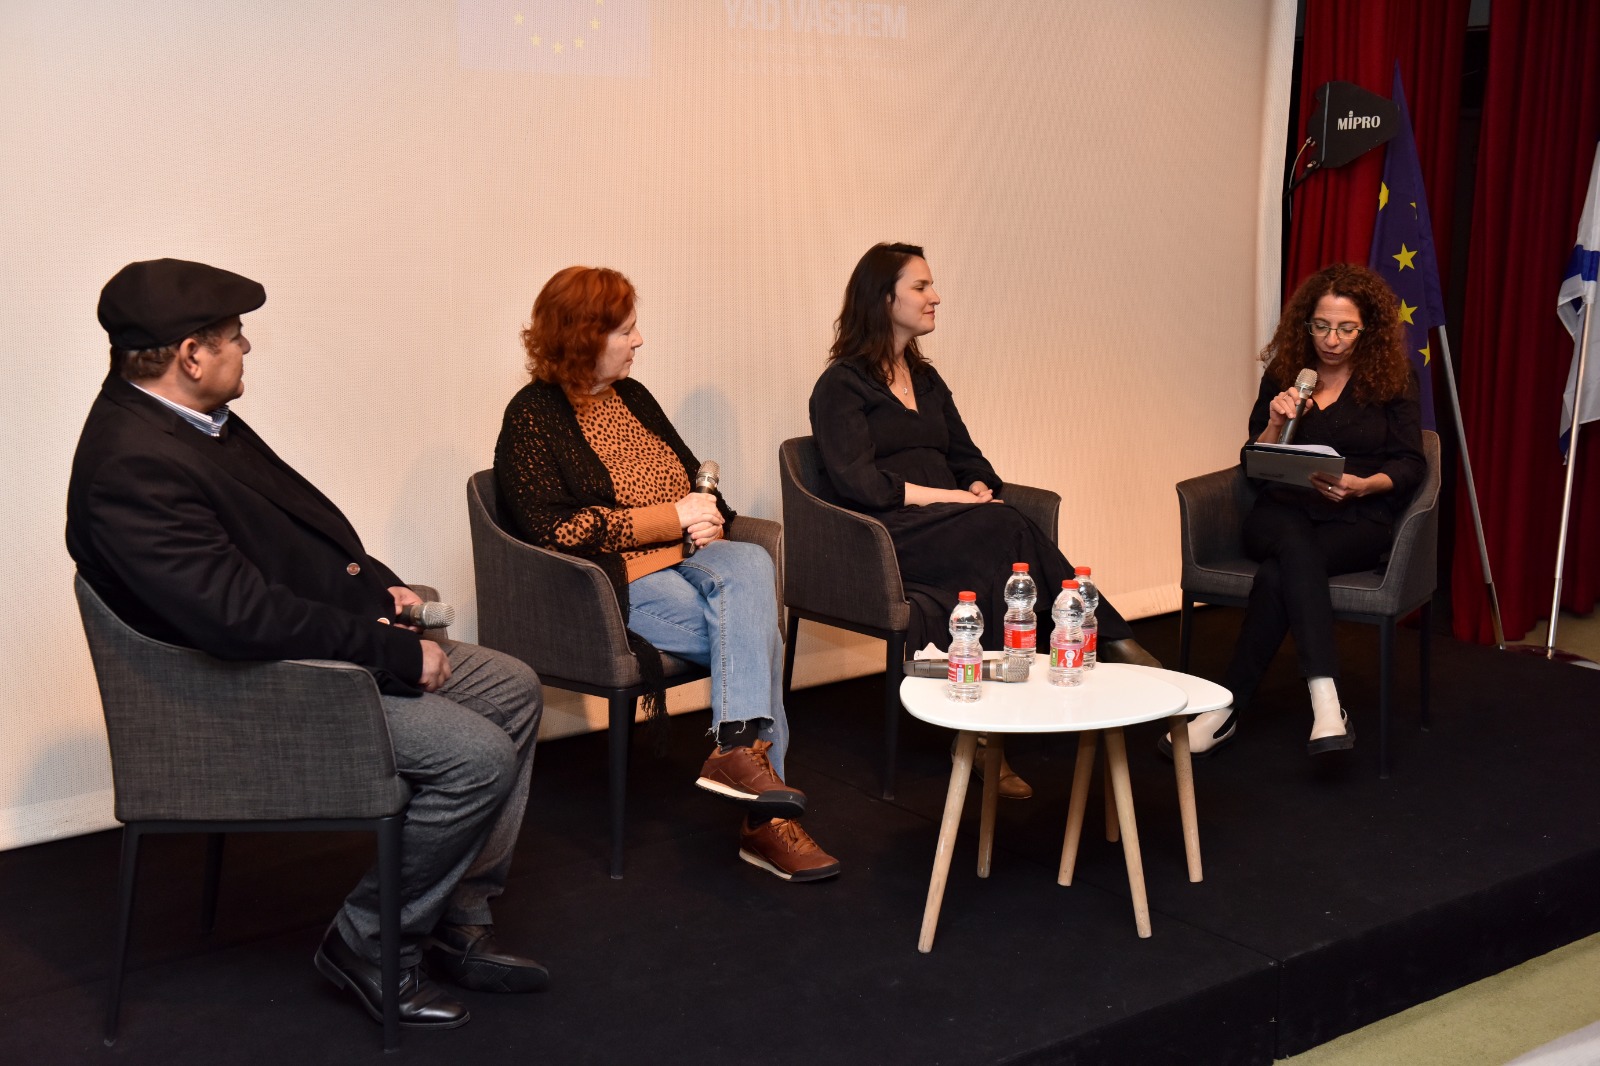 Liat Benhabib moderates a panel about the film "Love it was not"